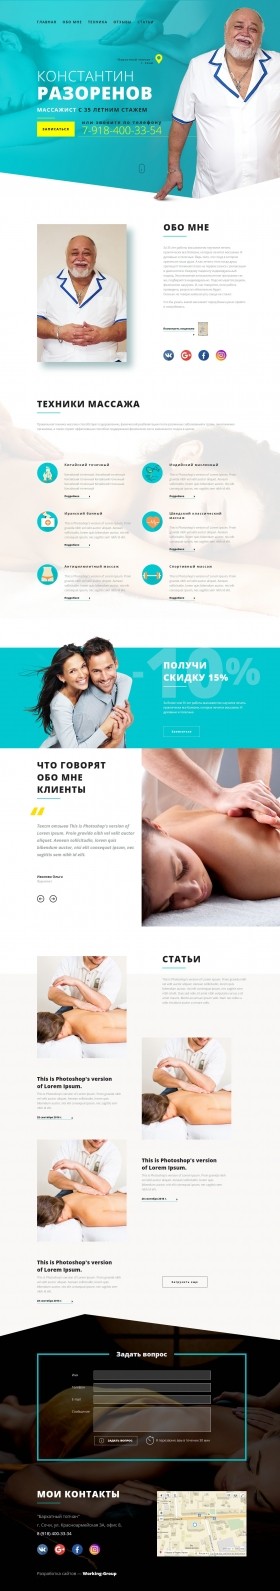 Landing page – Массажист